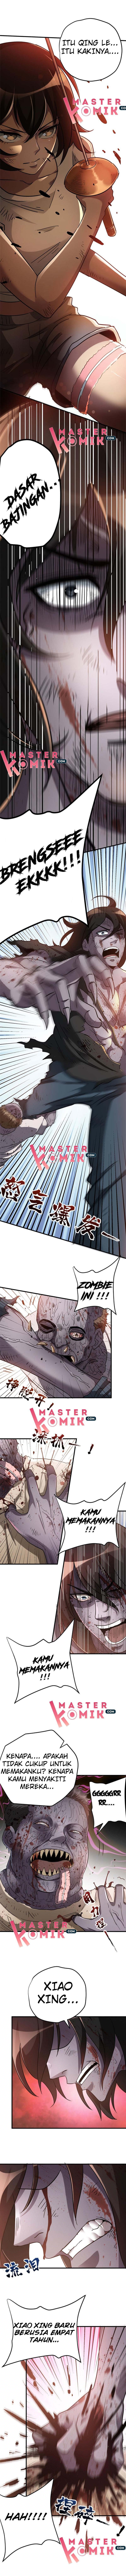 Strongest Evolution Of Zombie Chapter 07